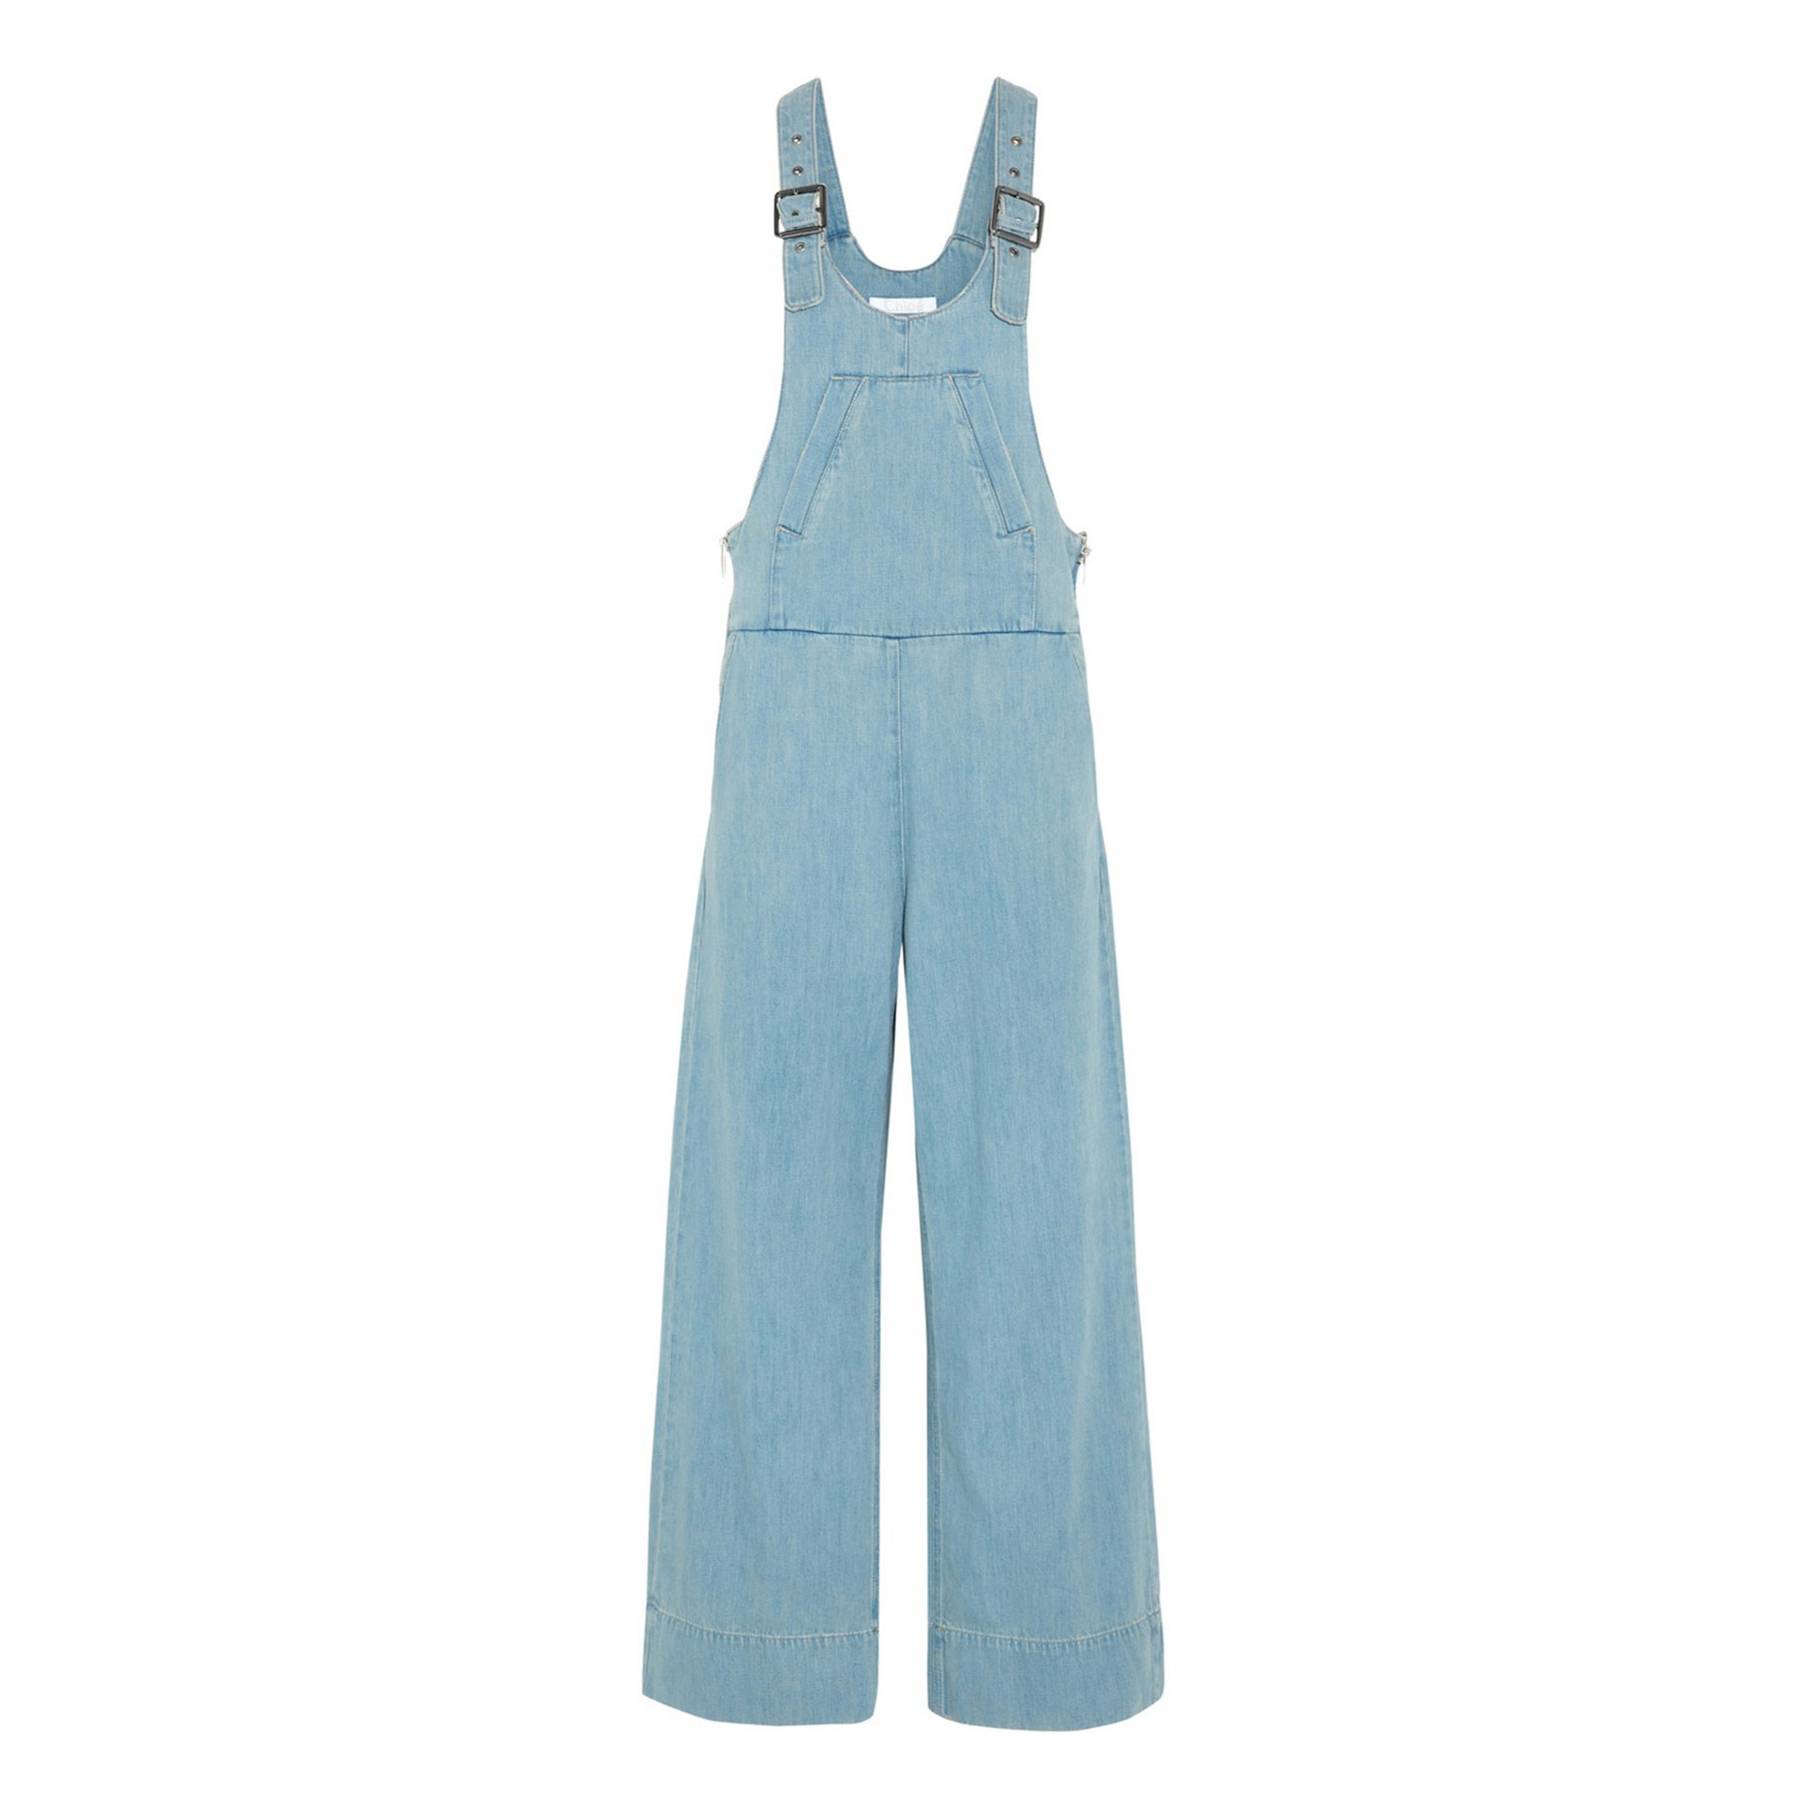 How to wear dungarees spring summer 2017 trend | Glamour UK